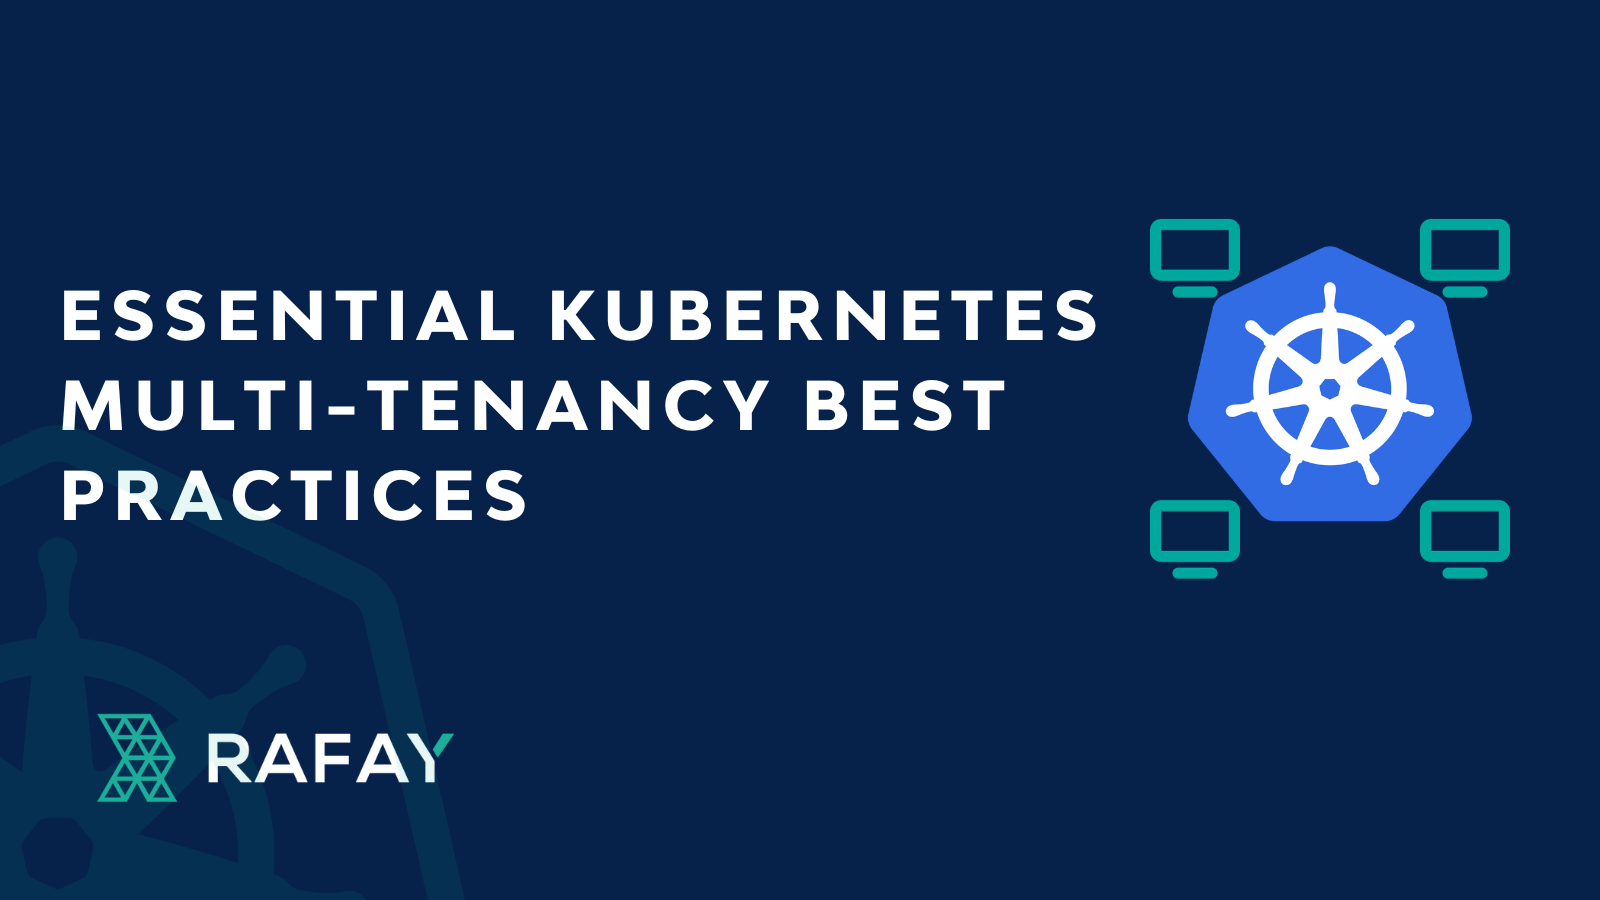 Image for Essential Kubernetes Multi-tenancy Best Practices